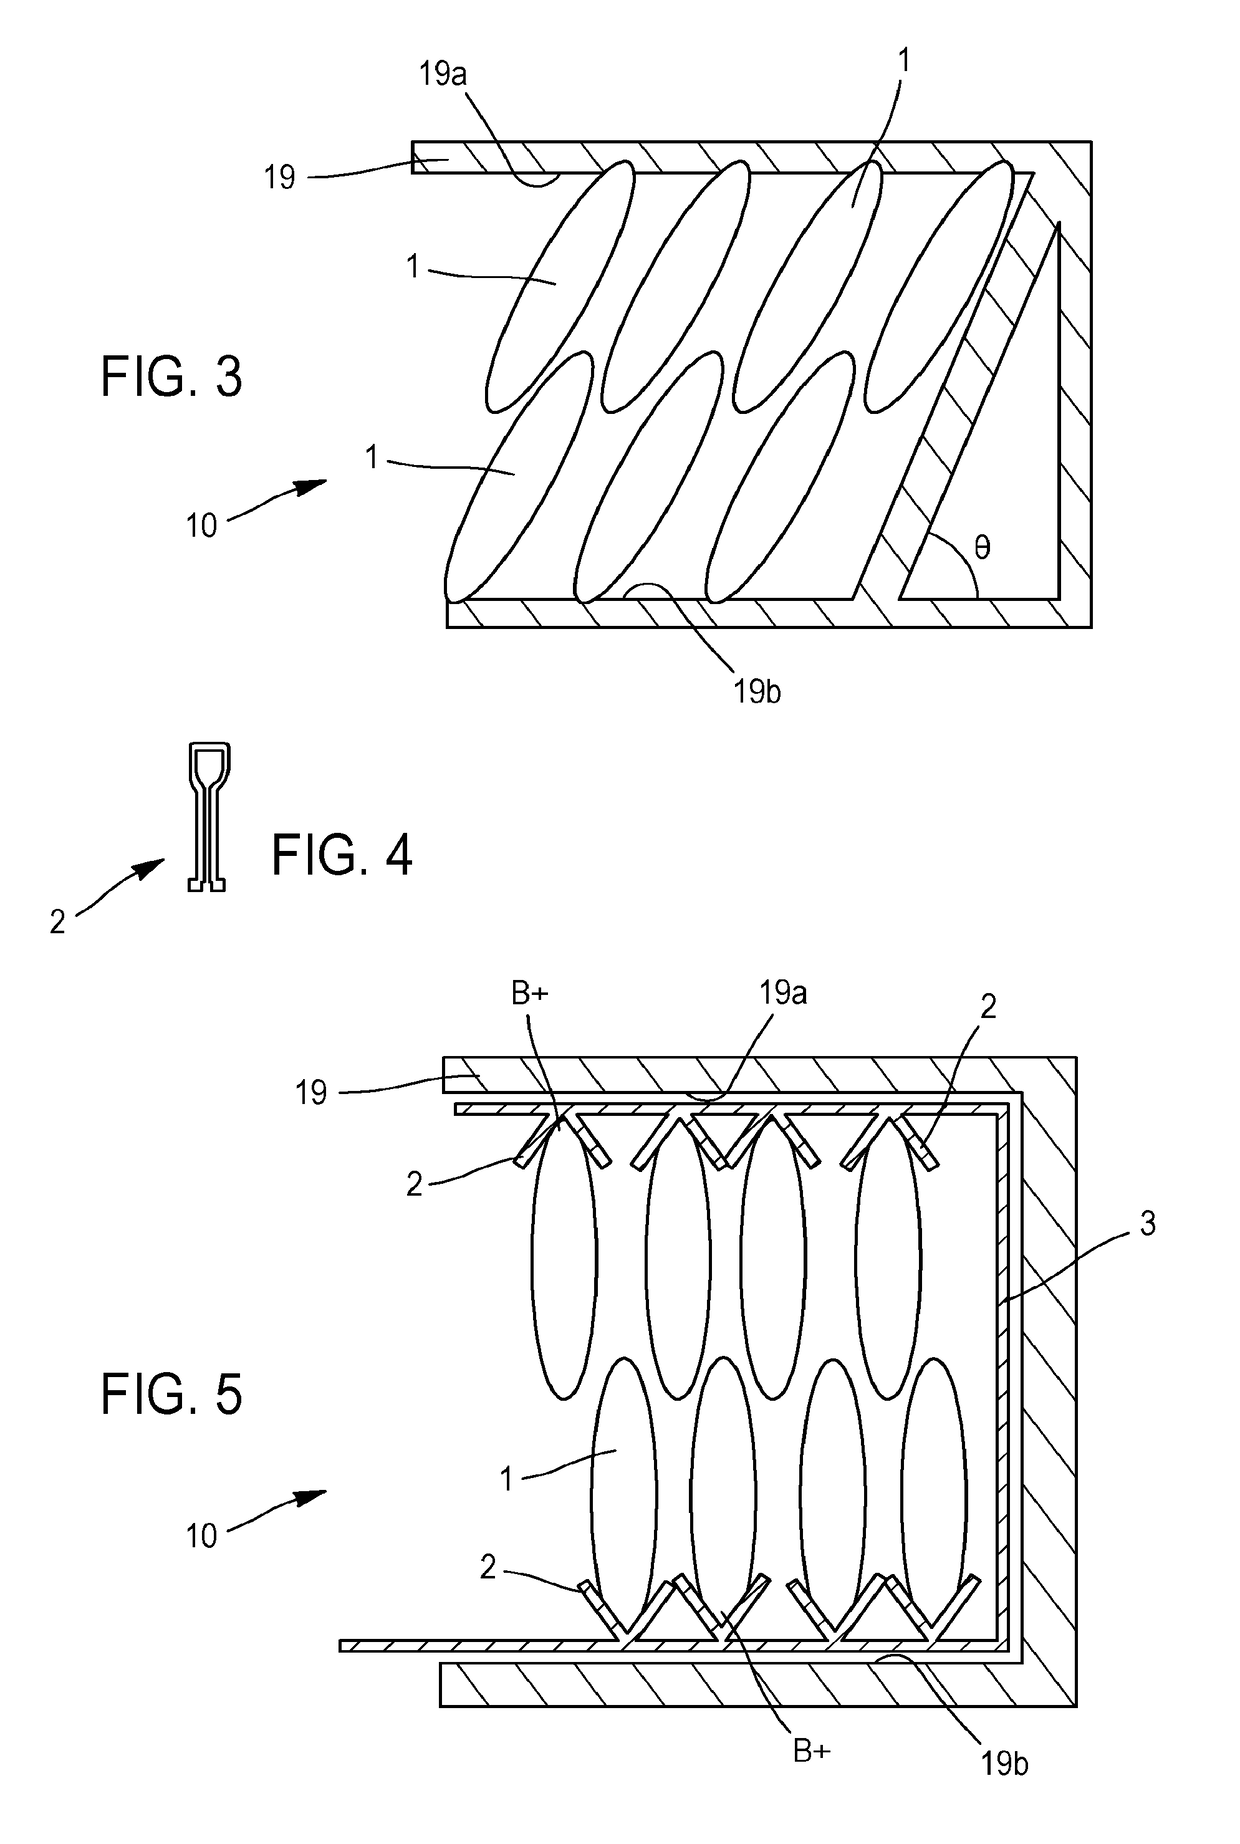 Assembly module comprising electrochemical cells received by lugs and connecting clips